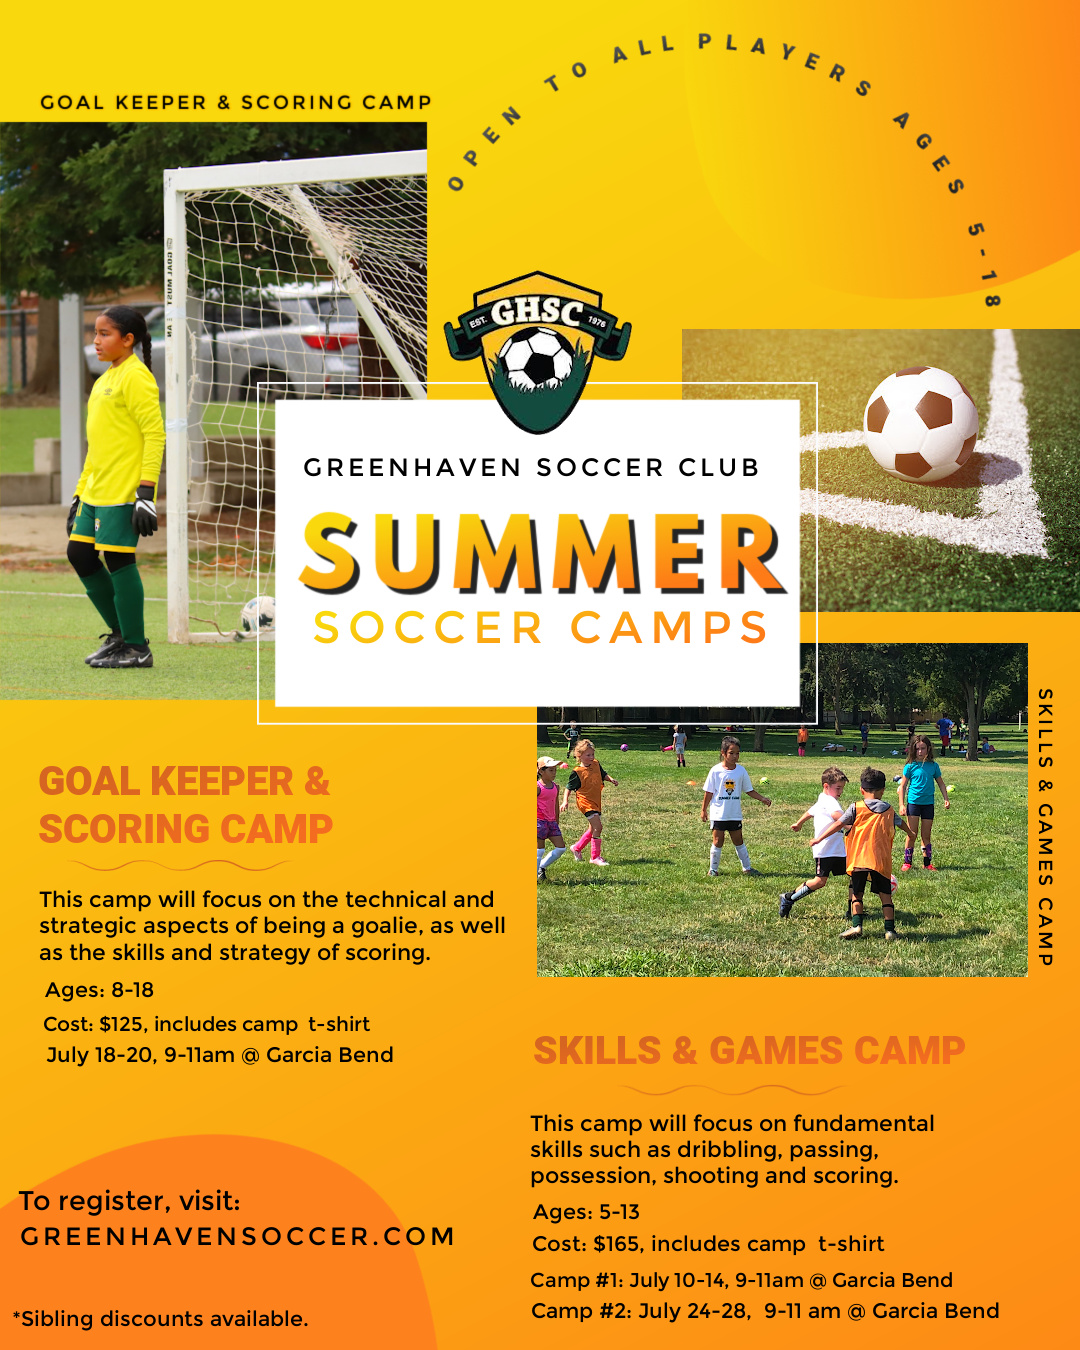 Summer Soccer Camps – Greenhaven Soccer Club